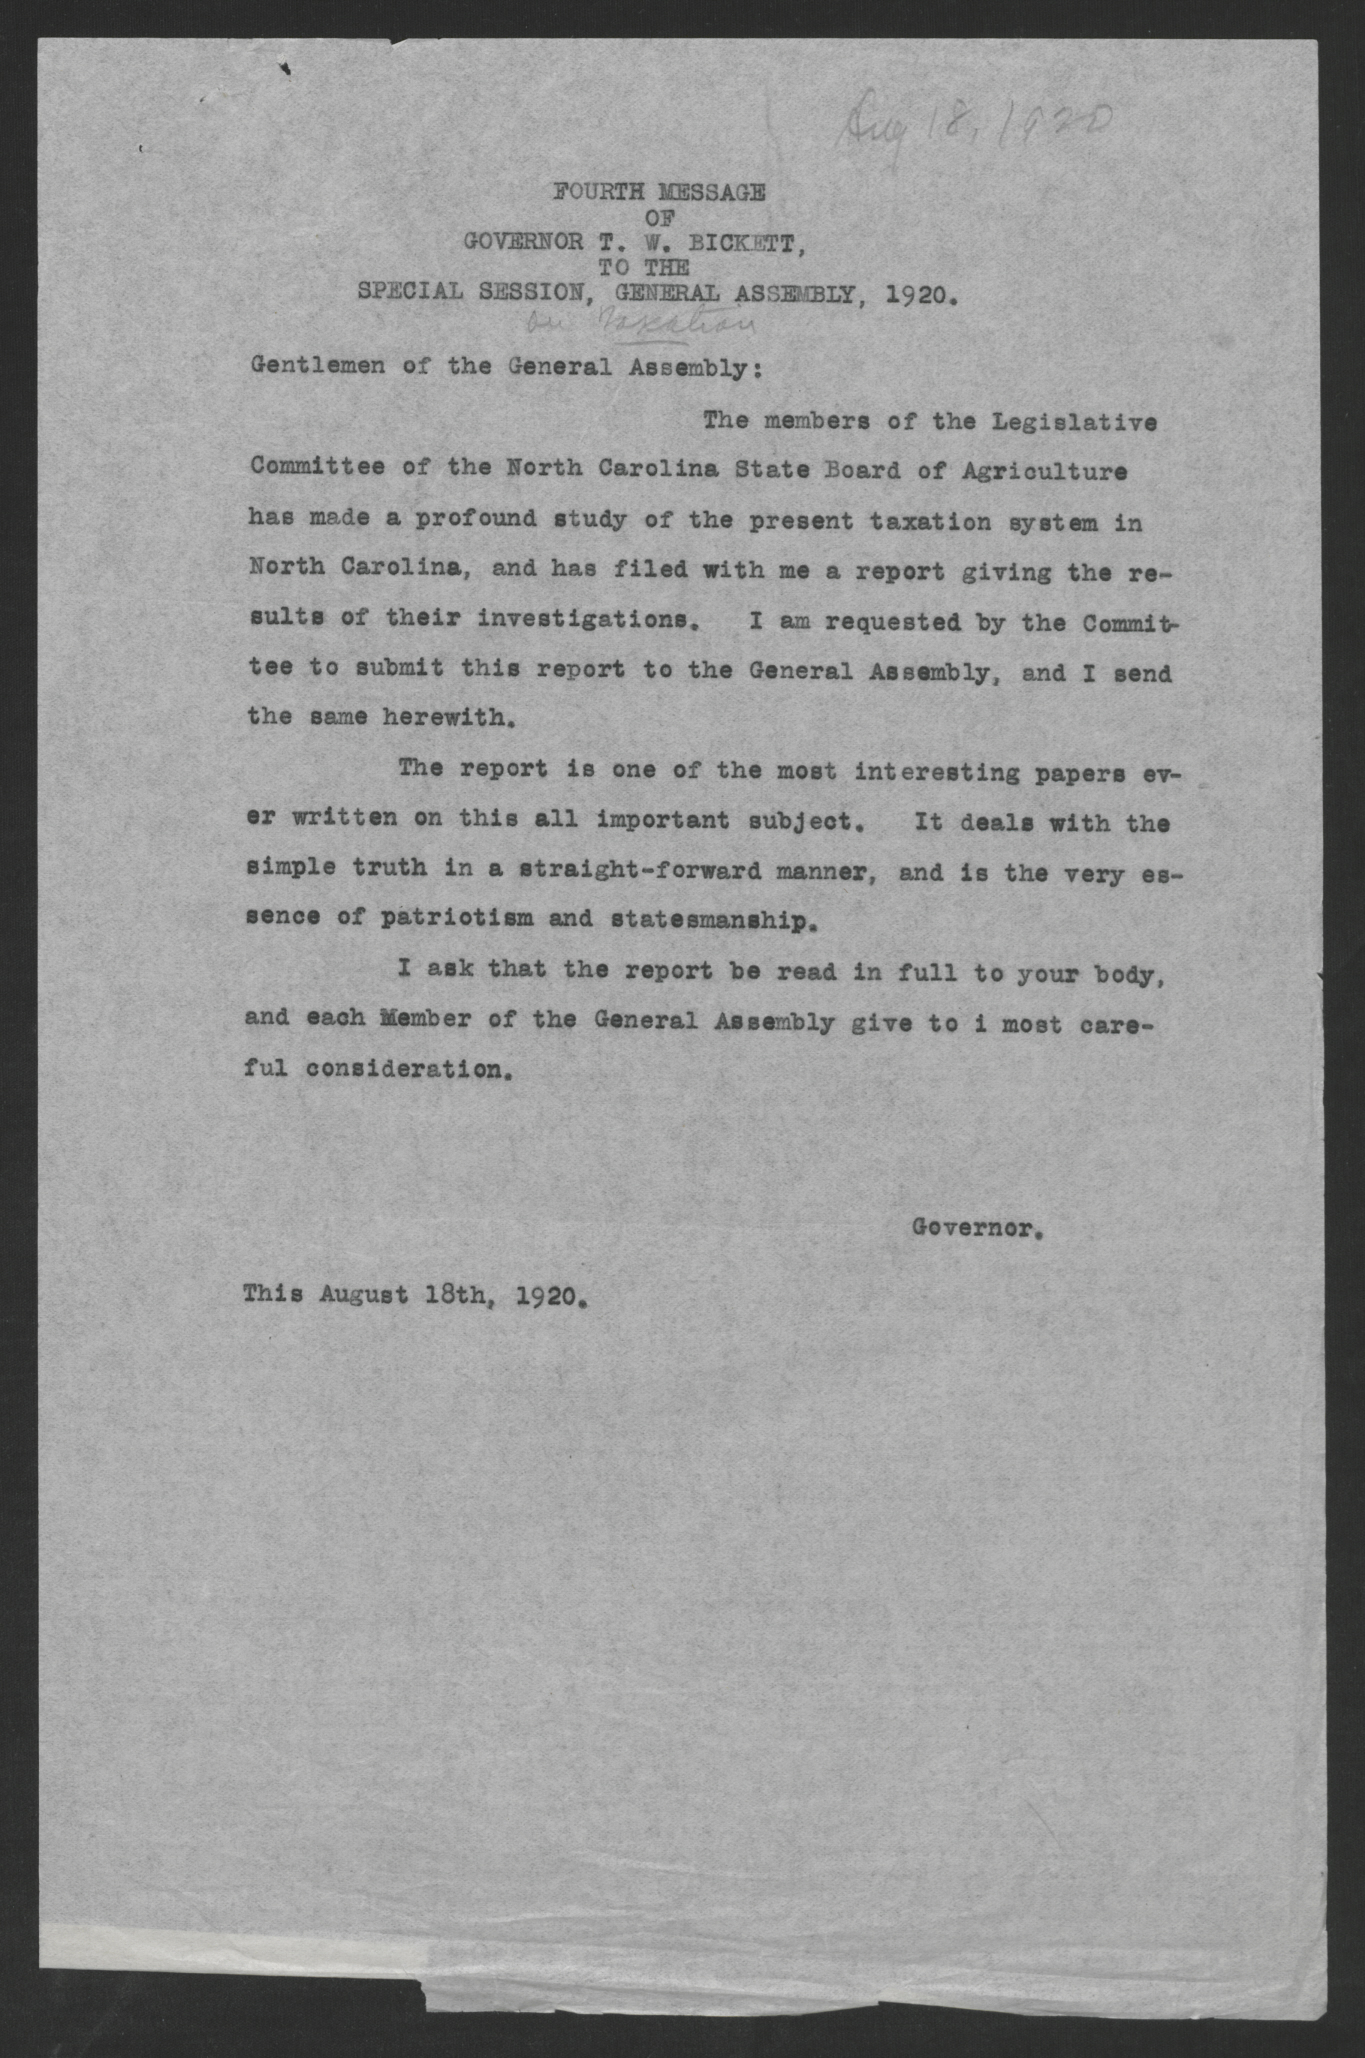 Fourth Message of Gov. Thomas W. Bickett to the General Assembly, August 18, 1920